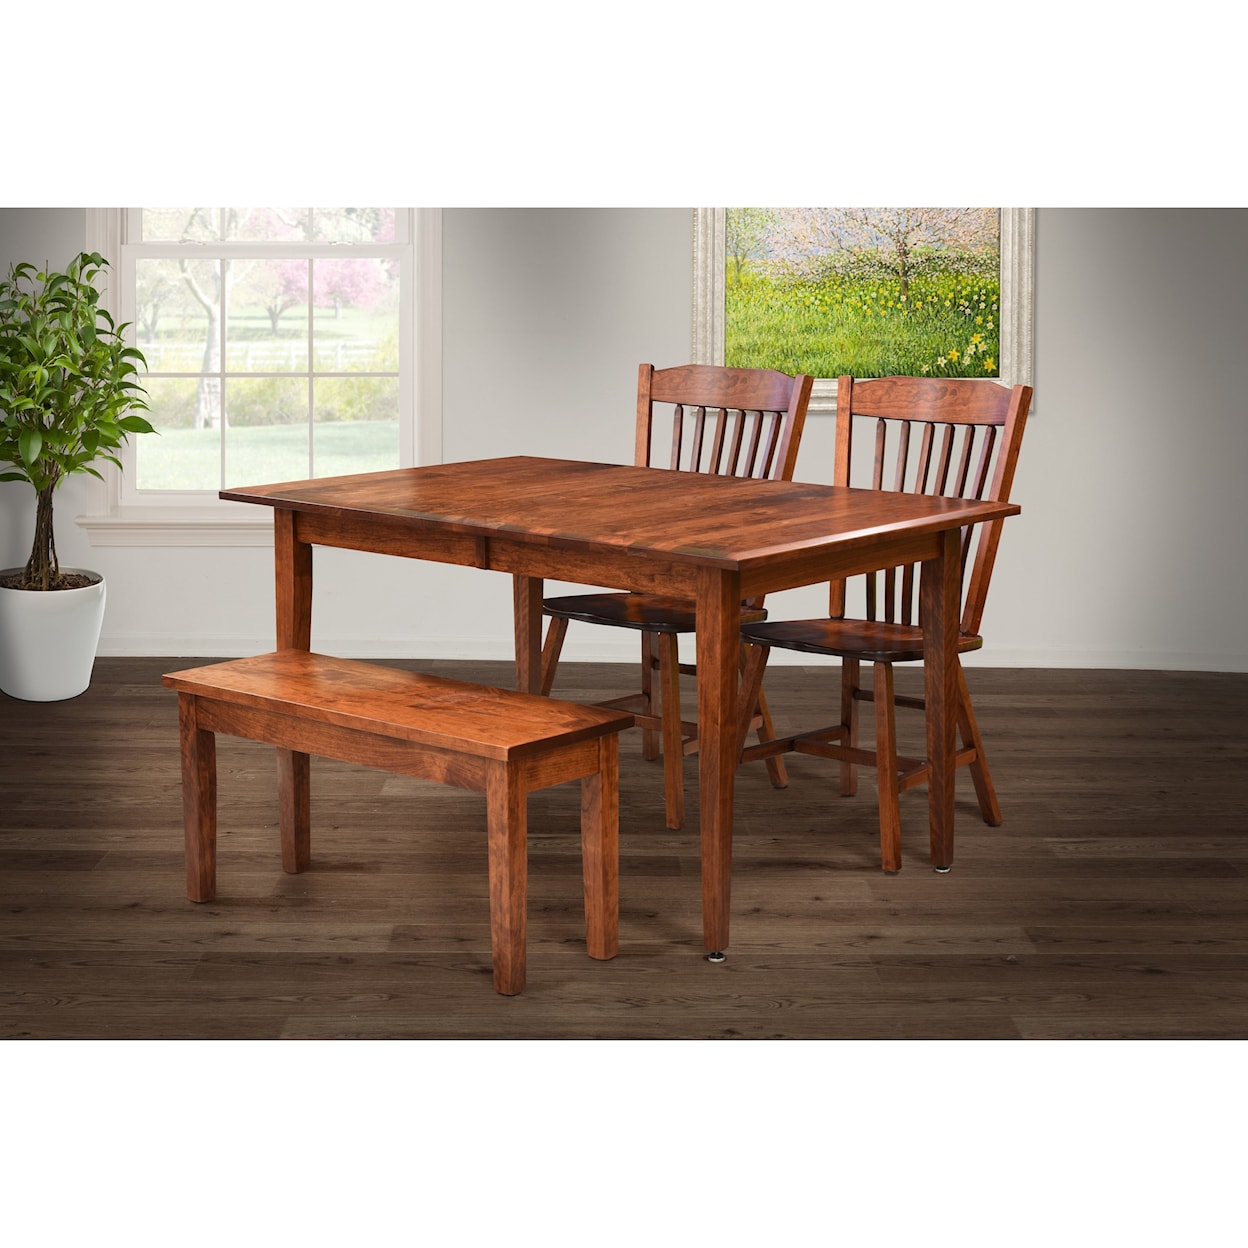 Amish Dining Room Santa Monica Table and Chair Set with Bench